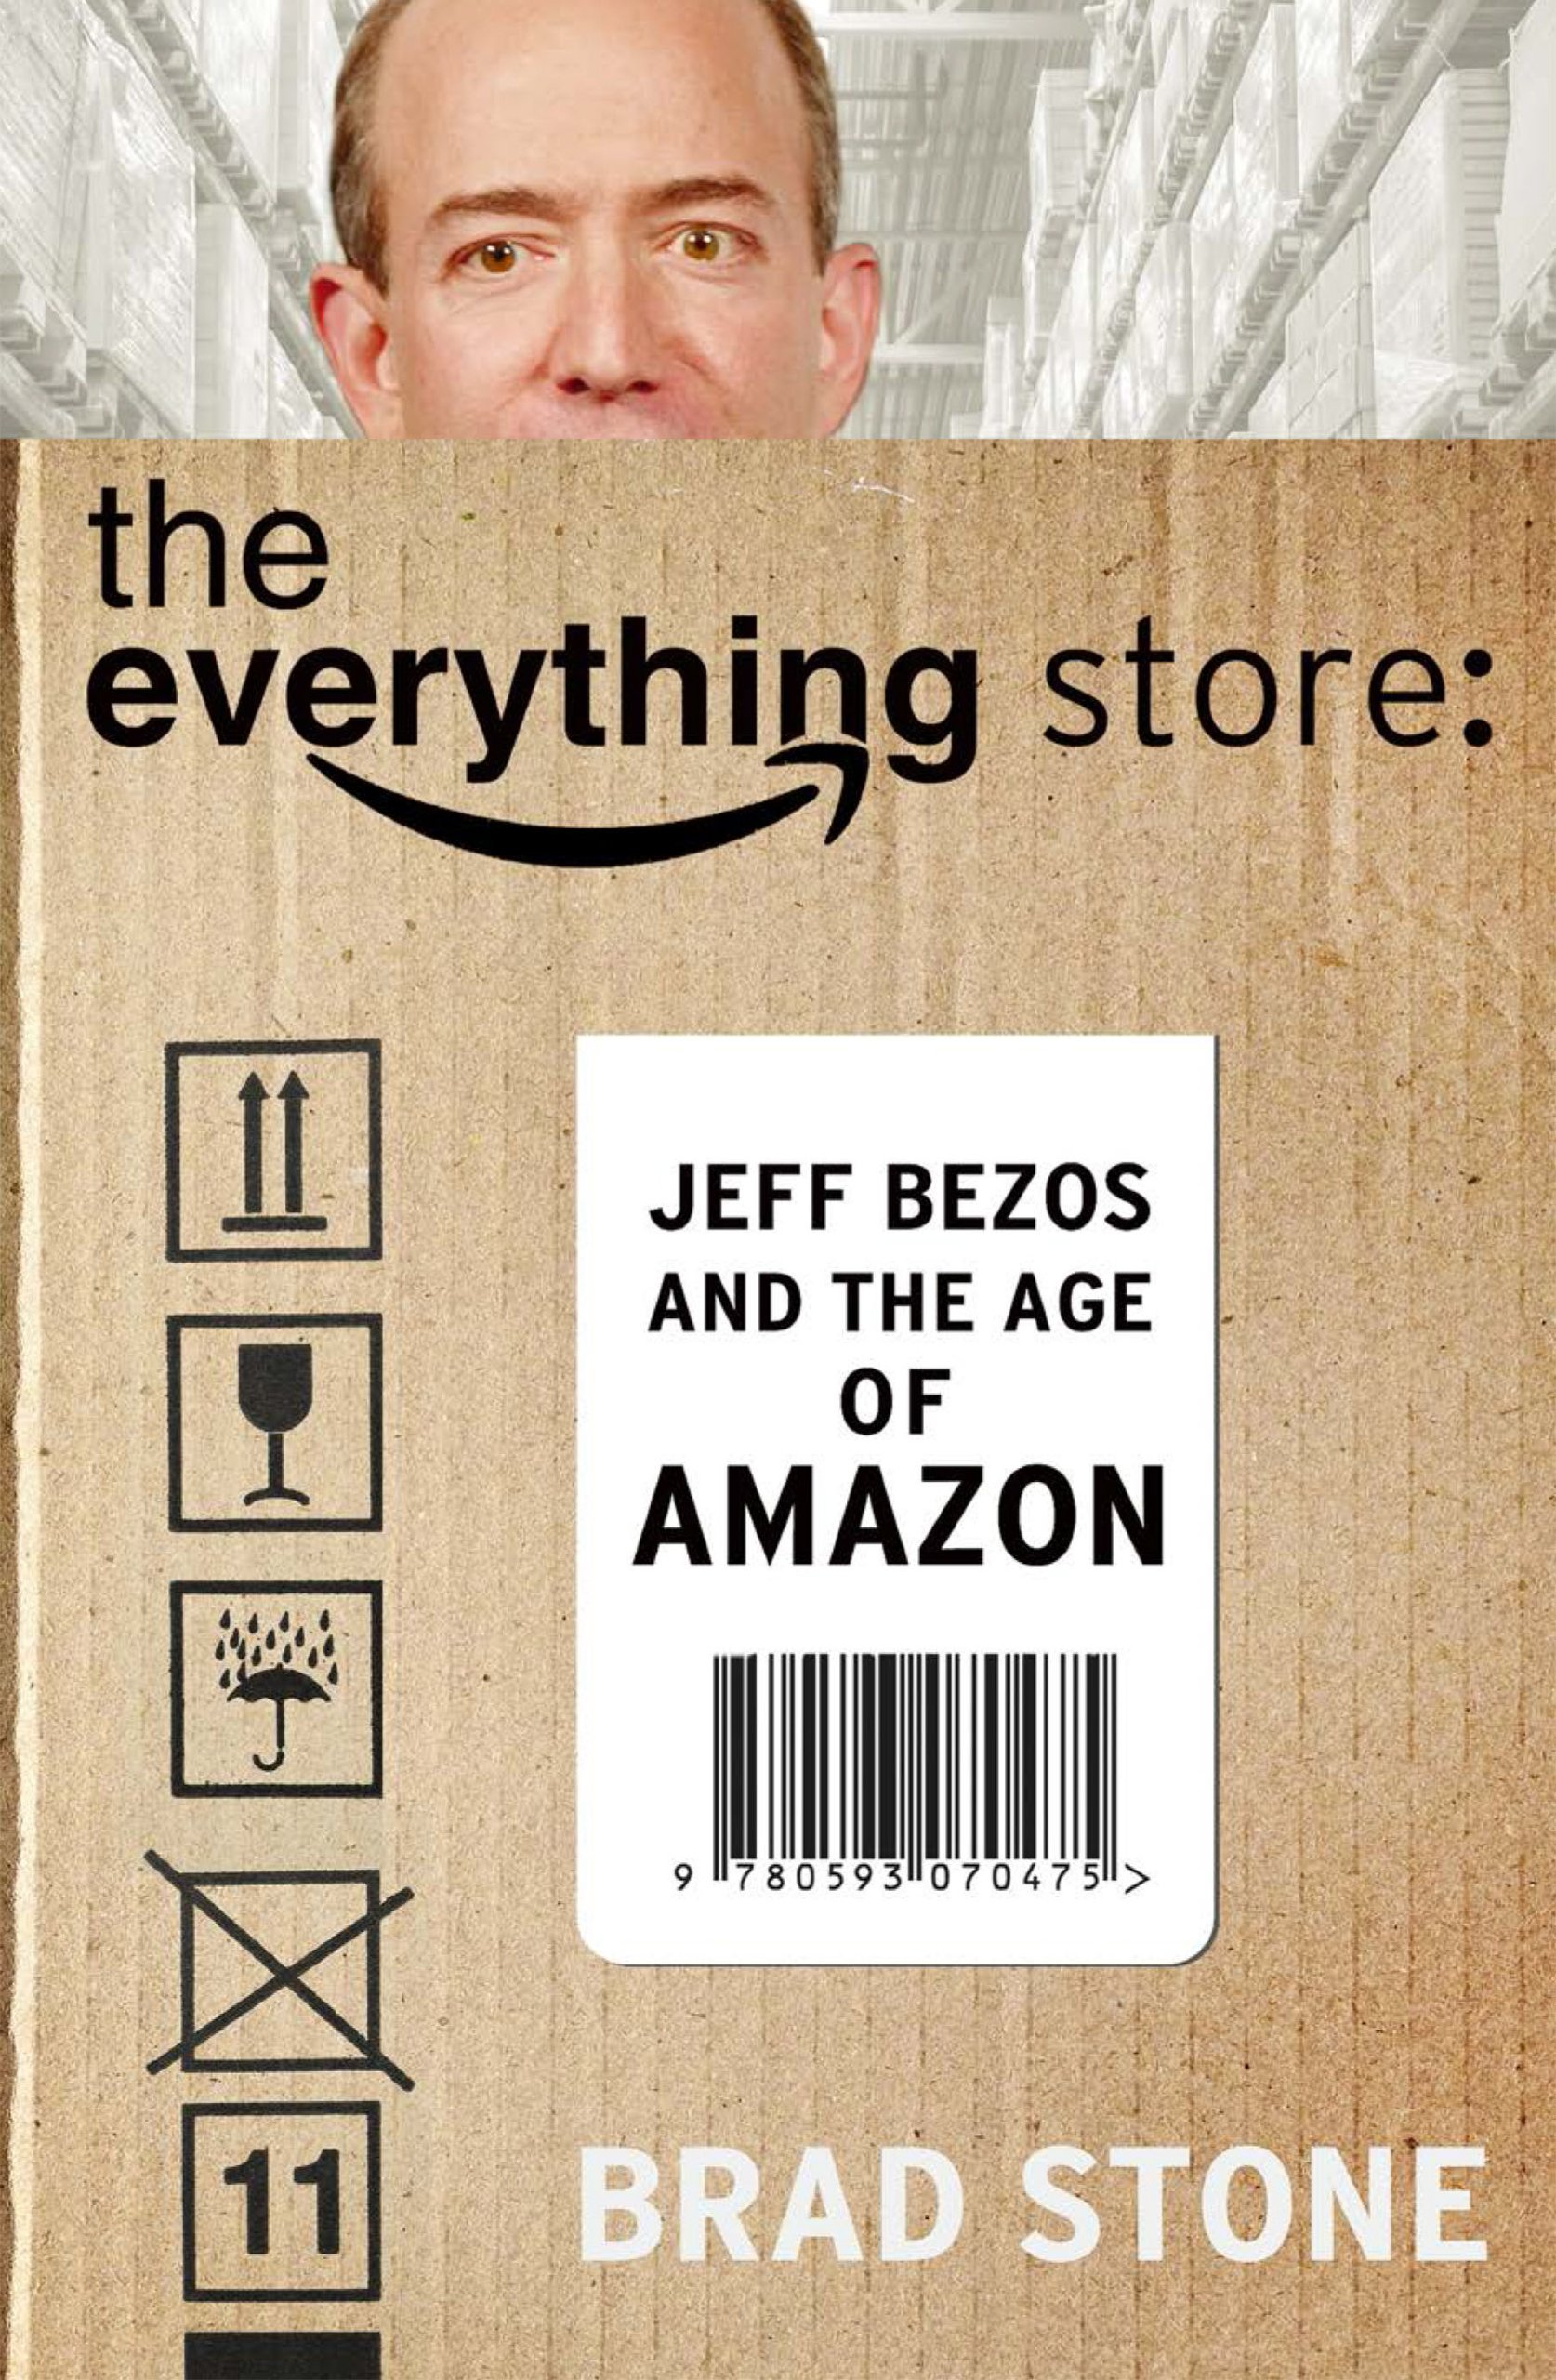 The Everything Store: Jeff Bezos and the Age of Amazon Book Summary